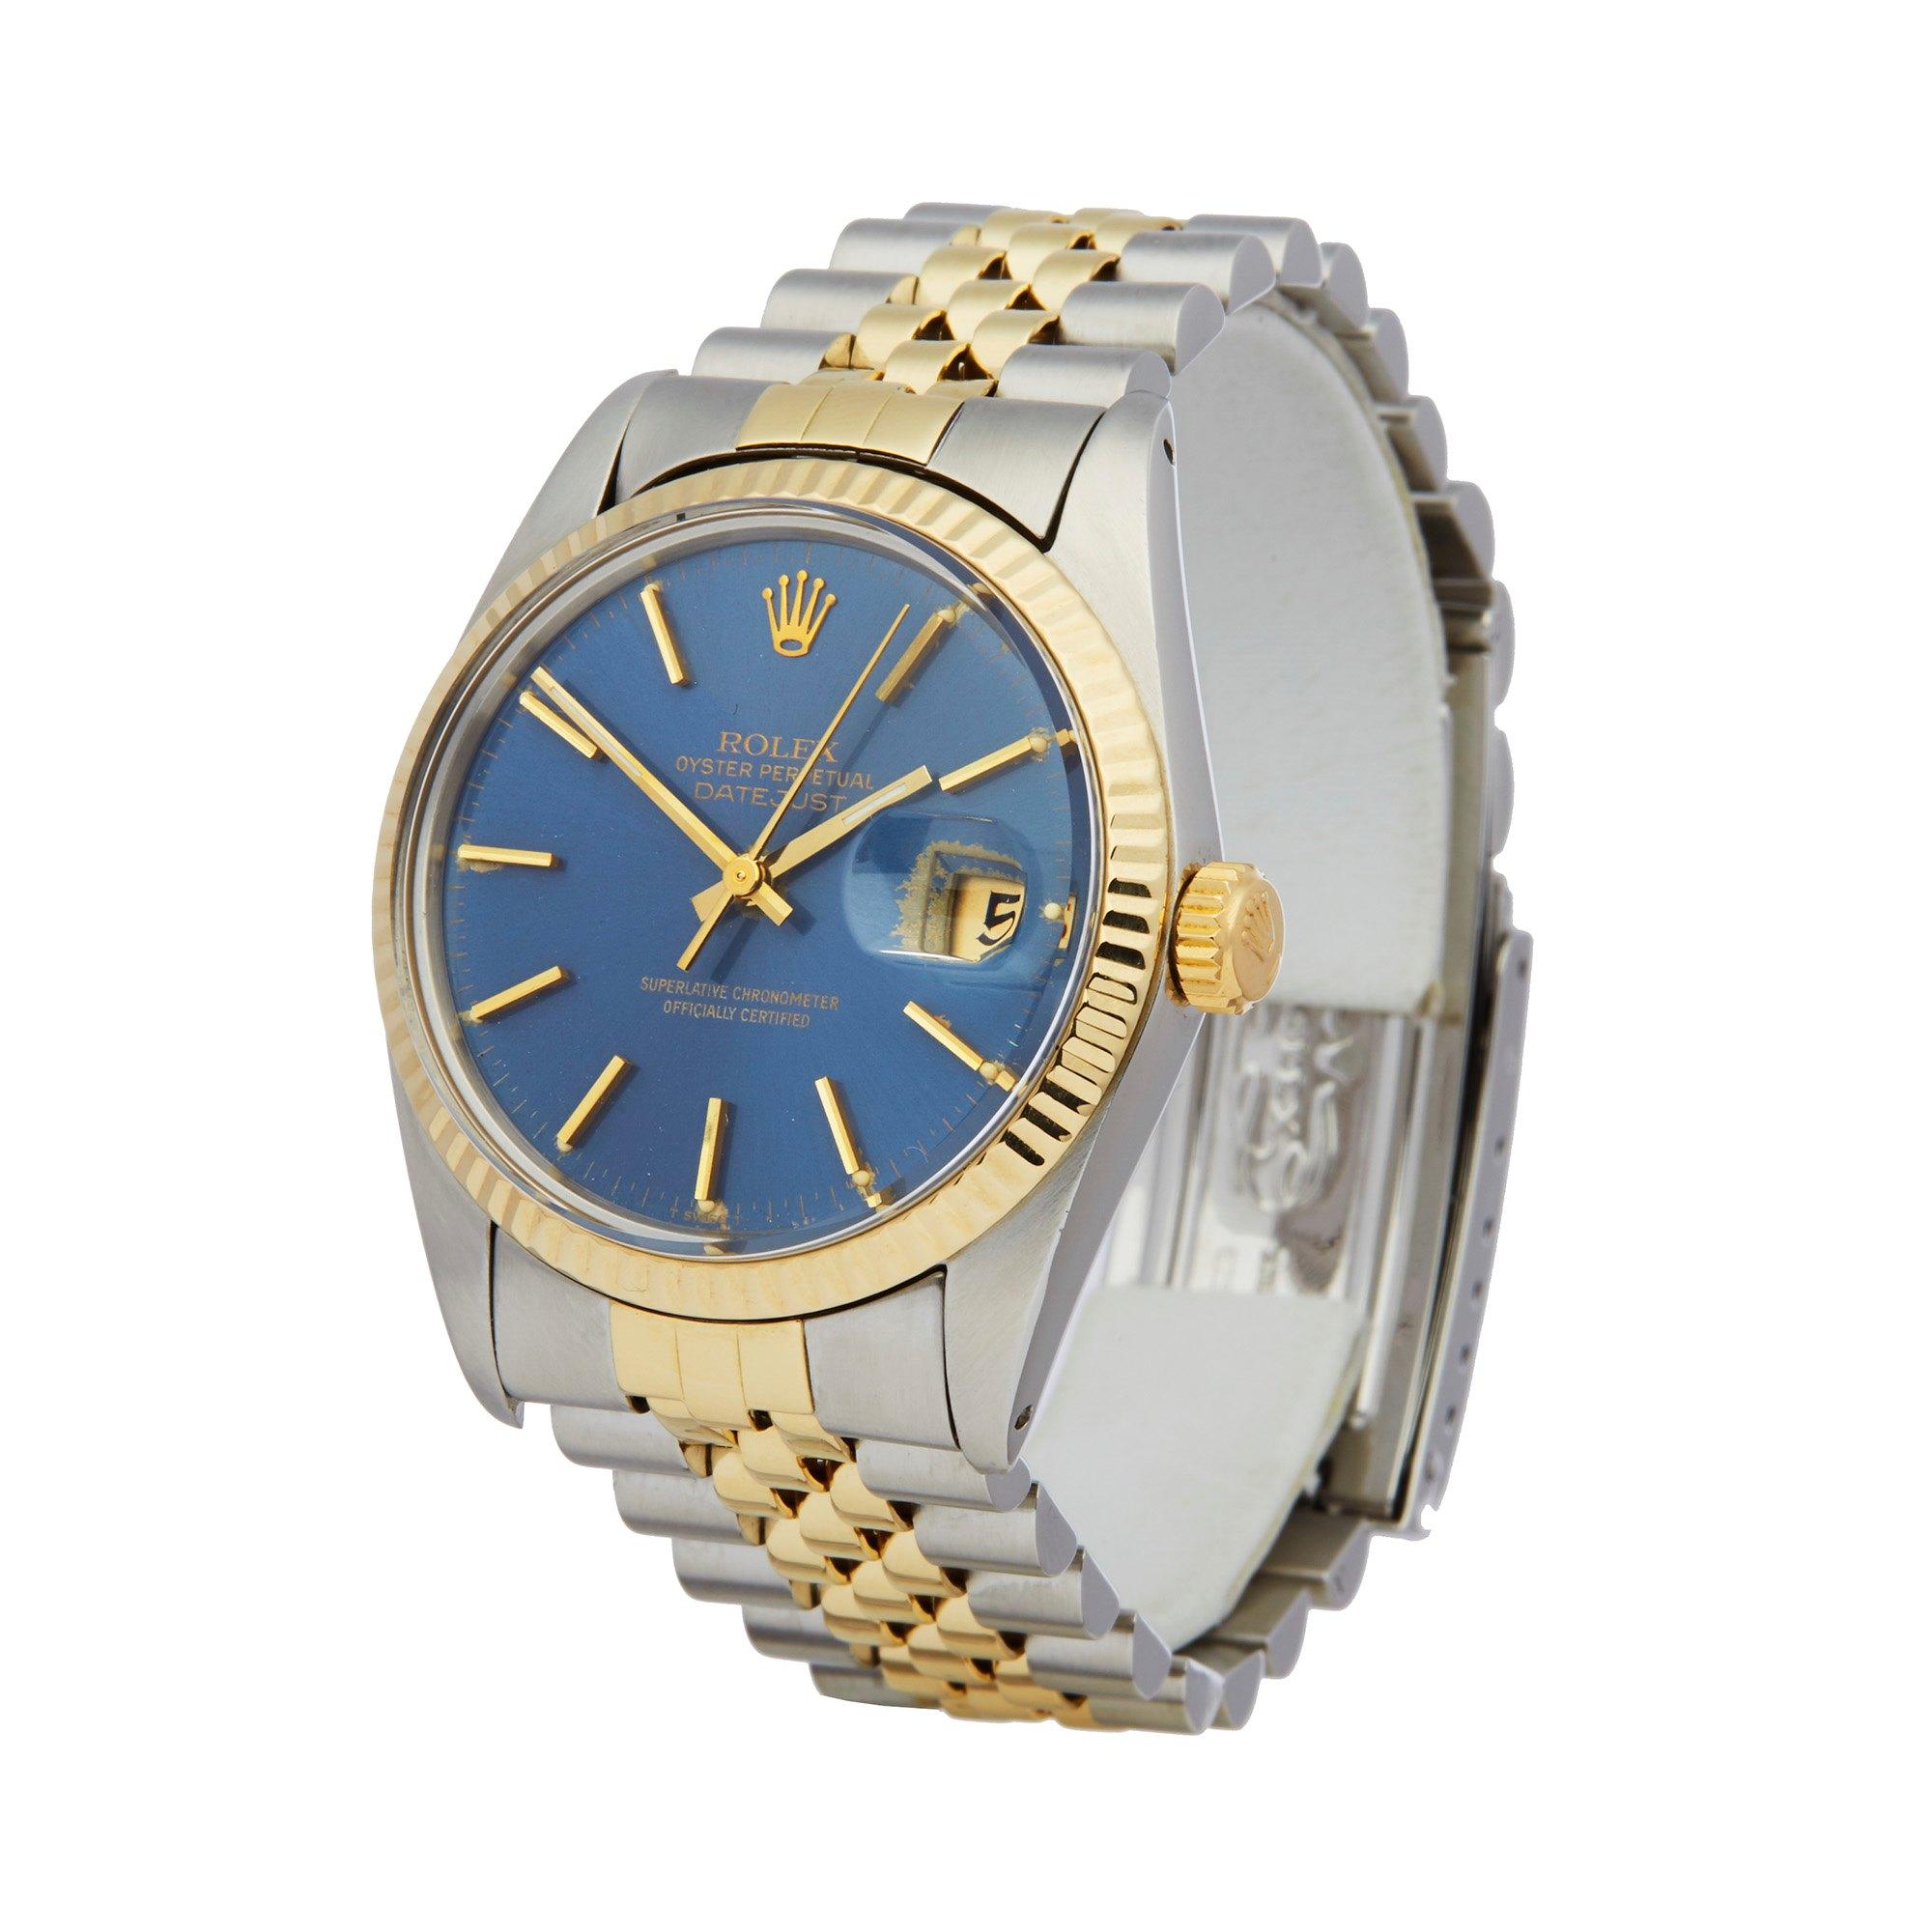 Xupes Reference: W007436
Manufacturer: Rolex
Model: Datejust
Model Variant: 26
Model Number: 179174
Age: 2009
Gender: Ladies
Complete With: Rolex Box
Dial: White Baton
Glass: Sapphire Crystal
Case Size: 26mm
Case Material: Stainless Steel
Strap